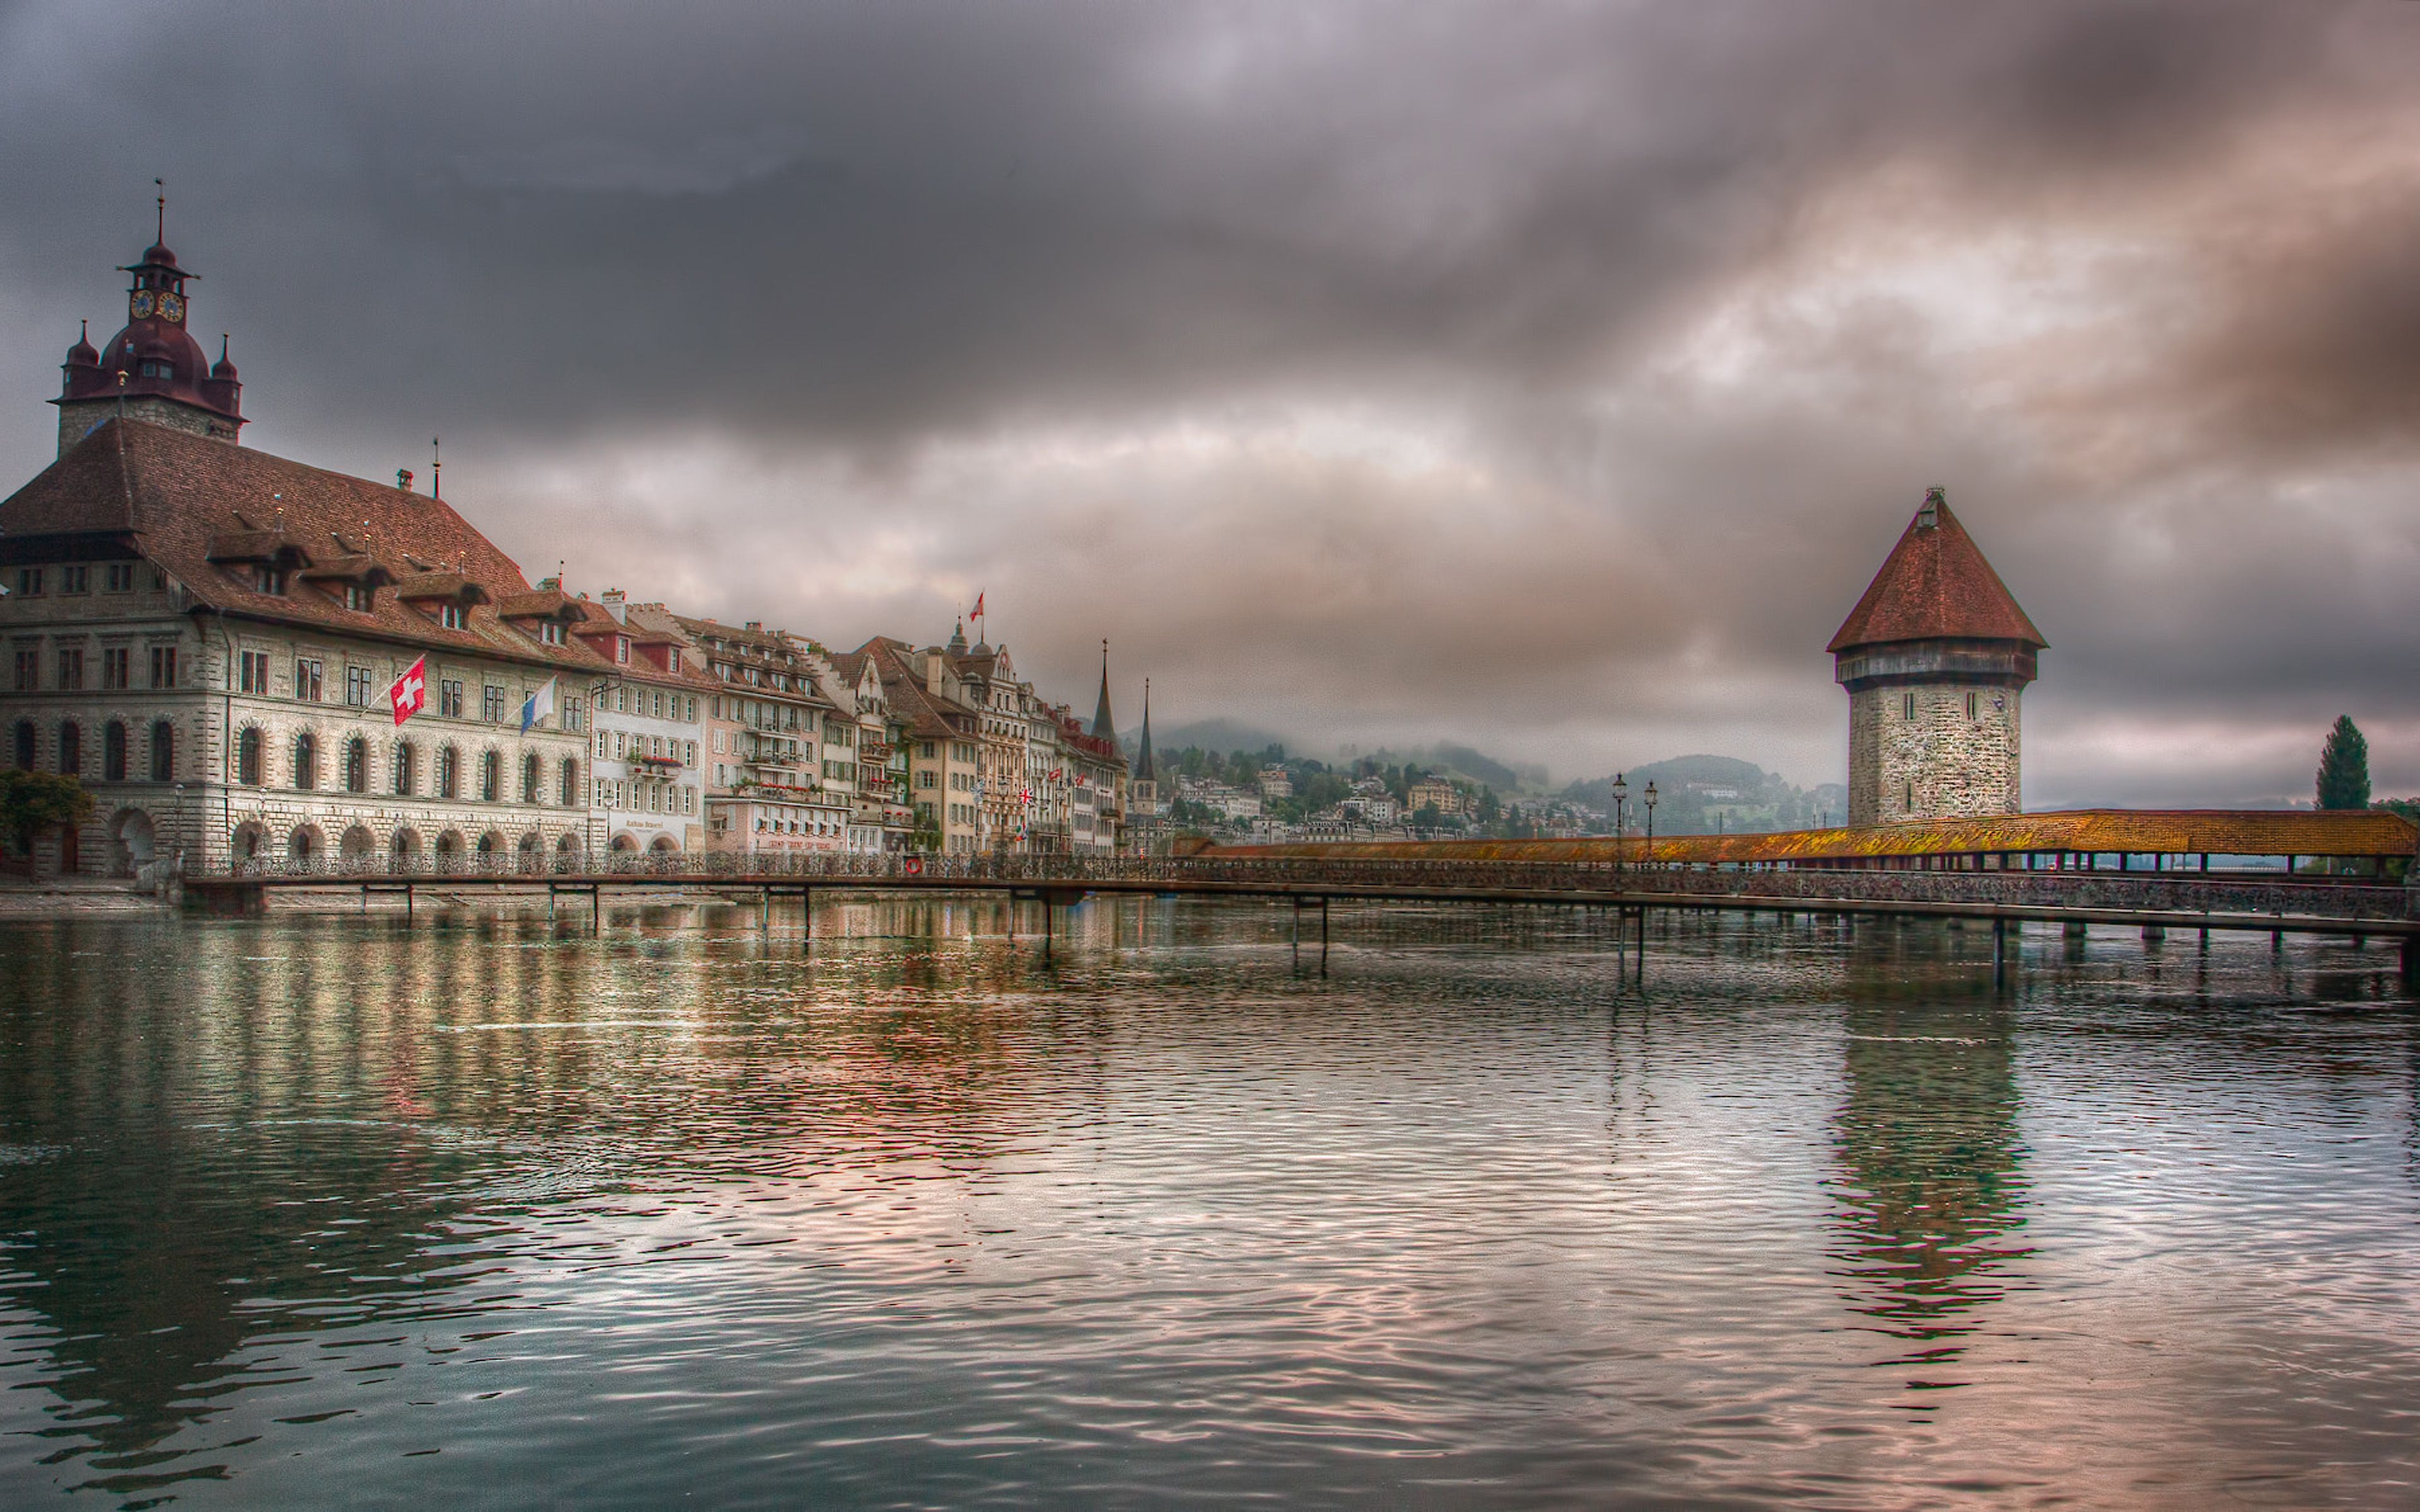 Luzern Lake Lucerne Village Of Switzerland 4k Ultra Hd Desktop Wallpapers For Computers Laptop Tablet And Mobile Phones 3840x2400 : Wallpapers13